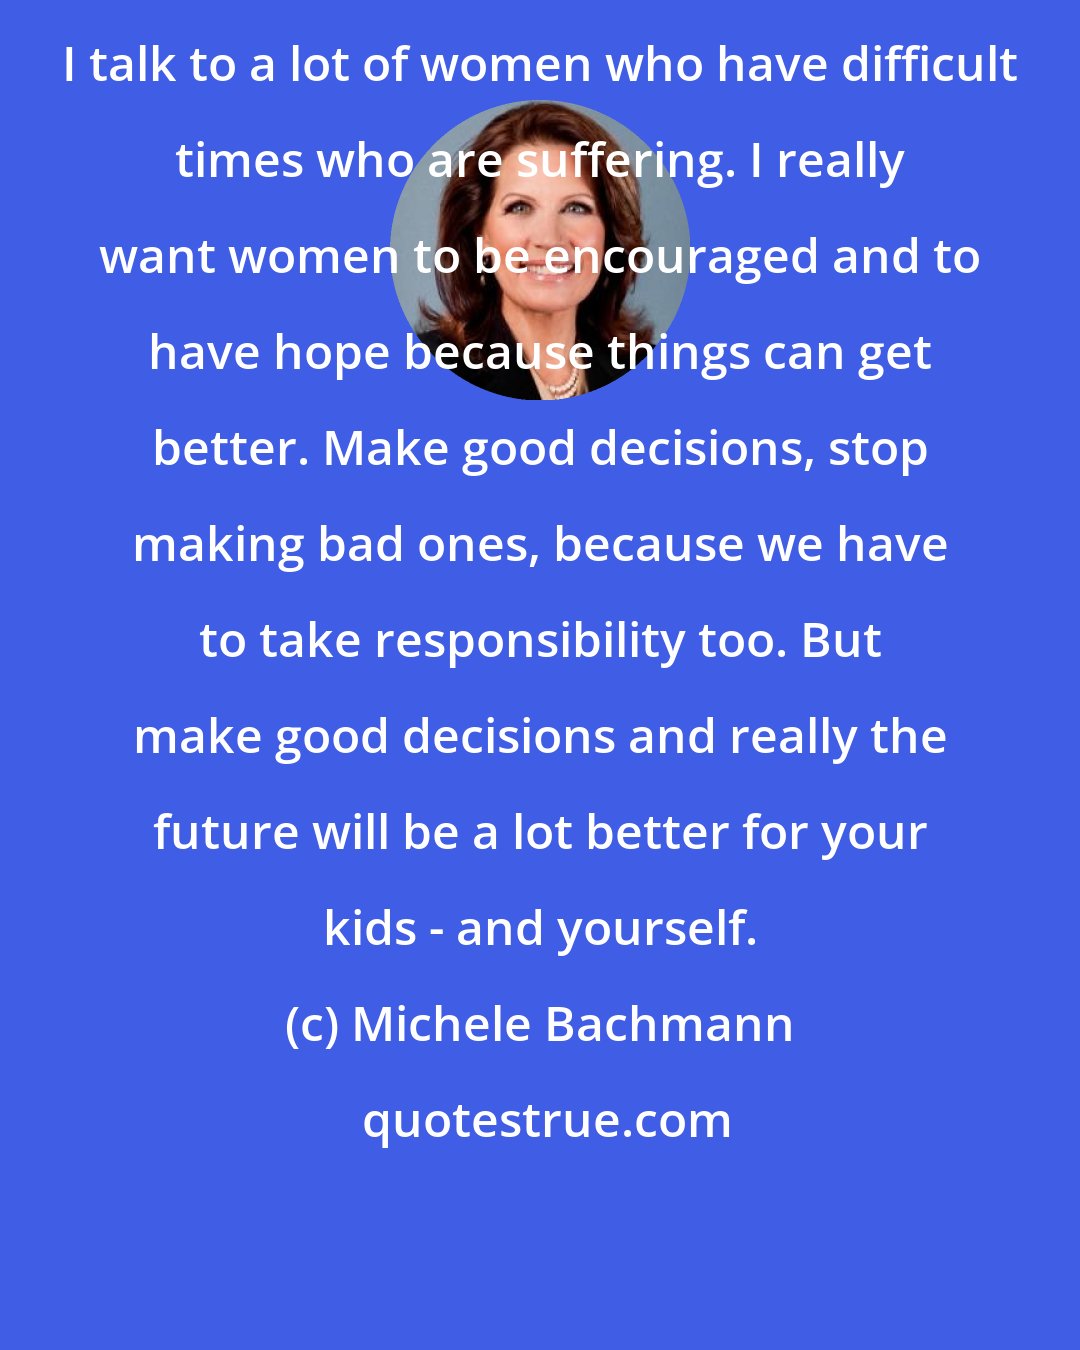 Michele Bachmann: I talk to a lot of women who have difficult times who are suffering. I really want women to be encouraged and to have hope because things can get better. Make good decisions, stop making bad ones, because we have to take responsibility too. But make good decisions and really the future will be a lot better for your kids - and yourself.